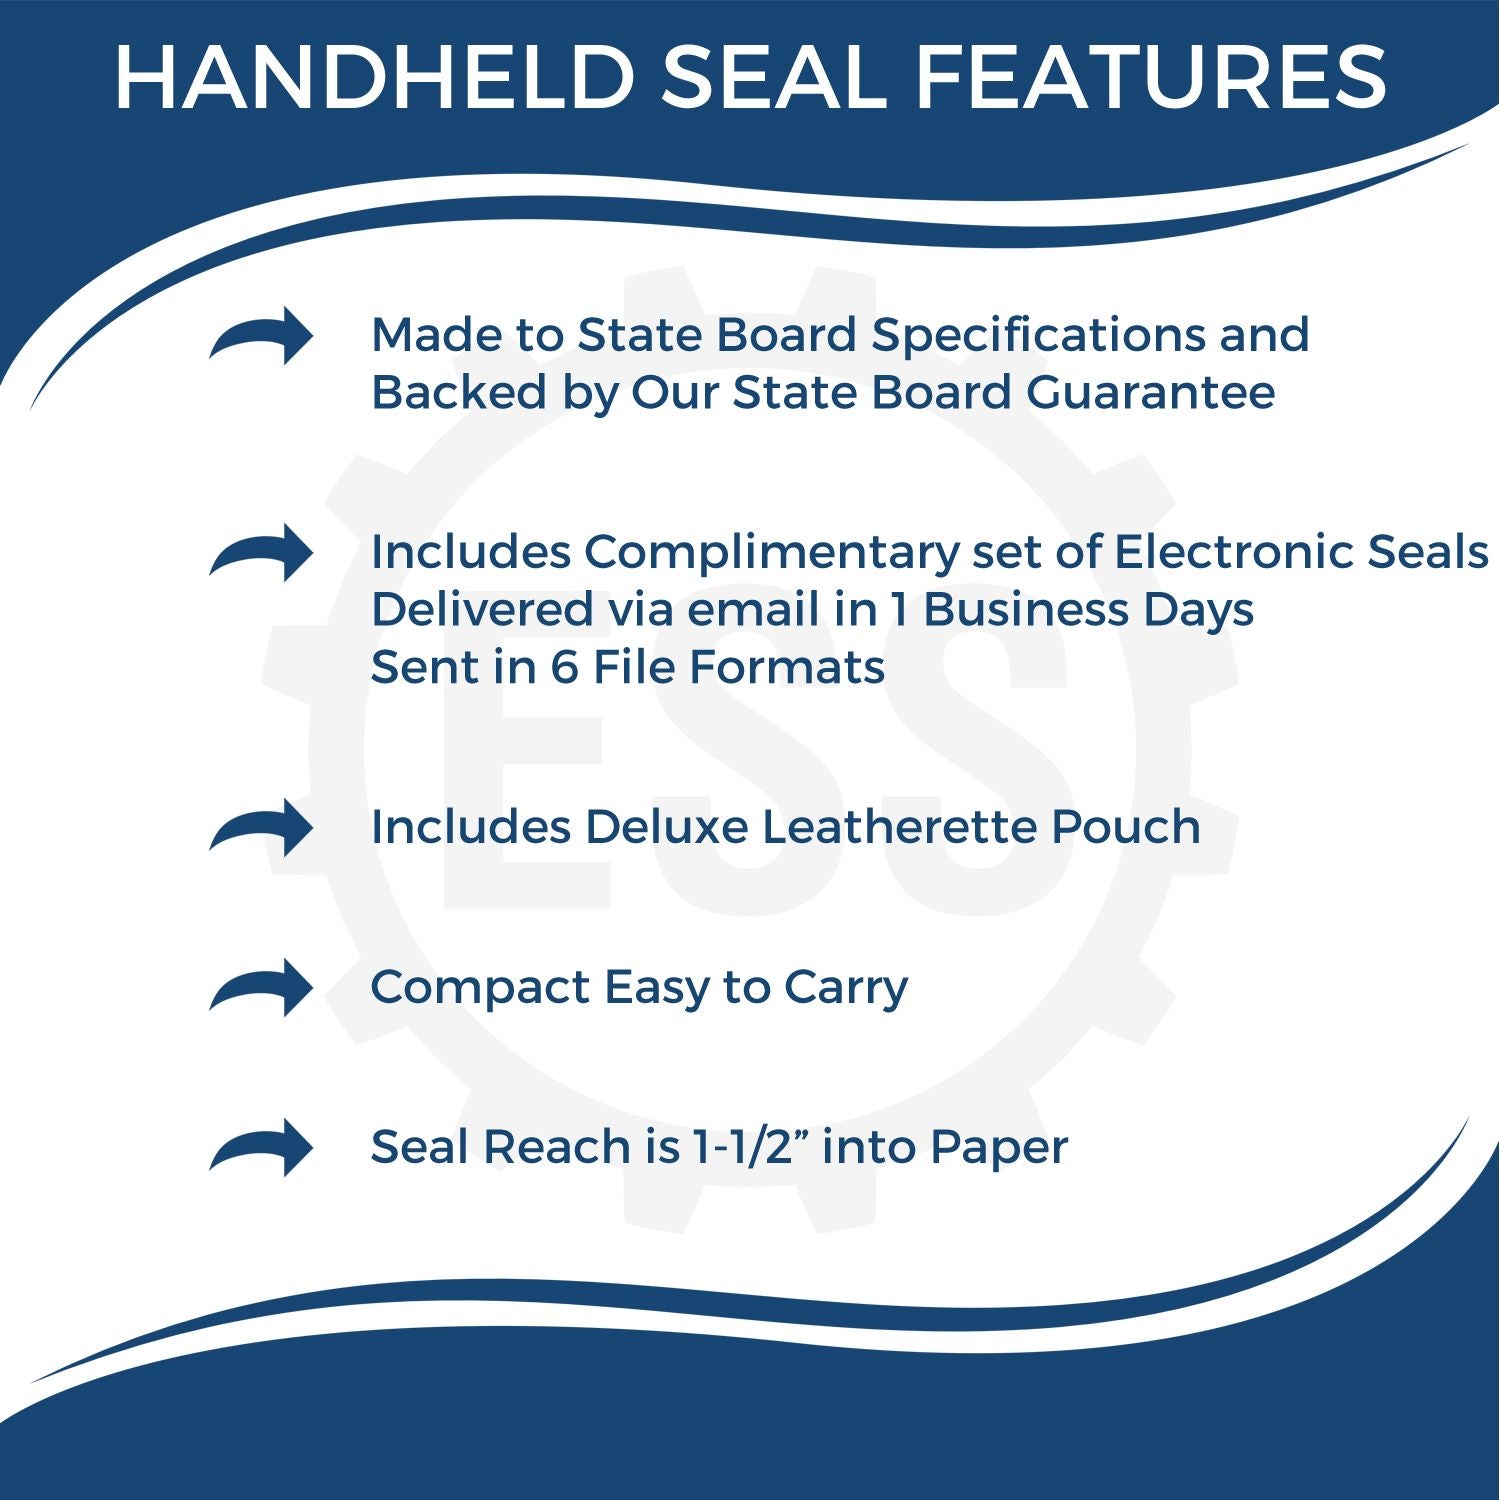 The main image for the Handheld District of Columbia Land Surveyor Seal depicting a sample of the imprint and electronic files